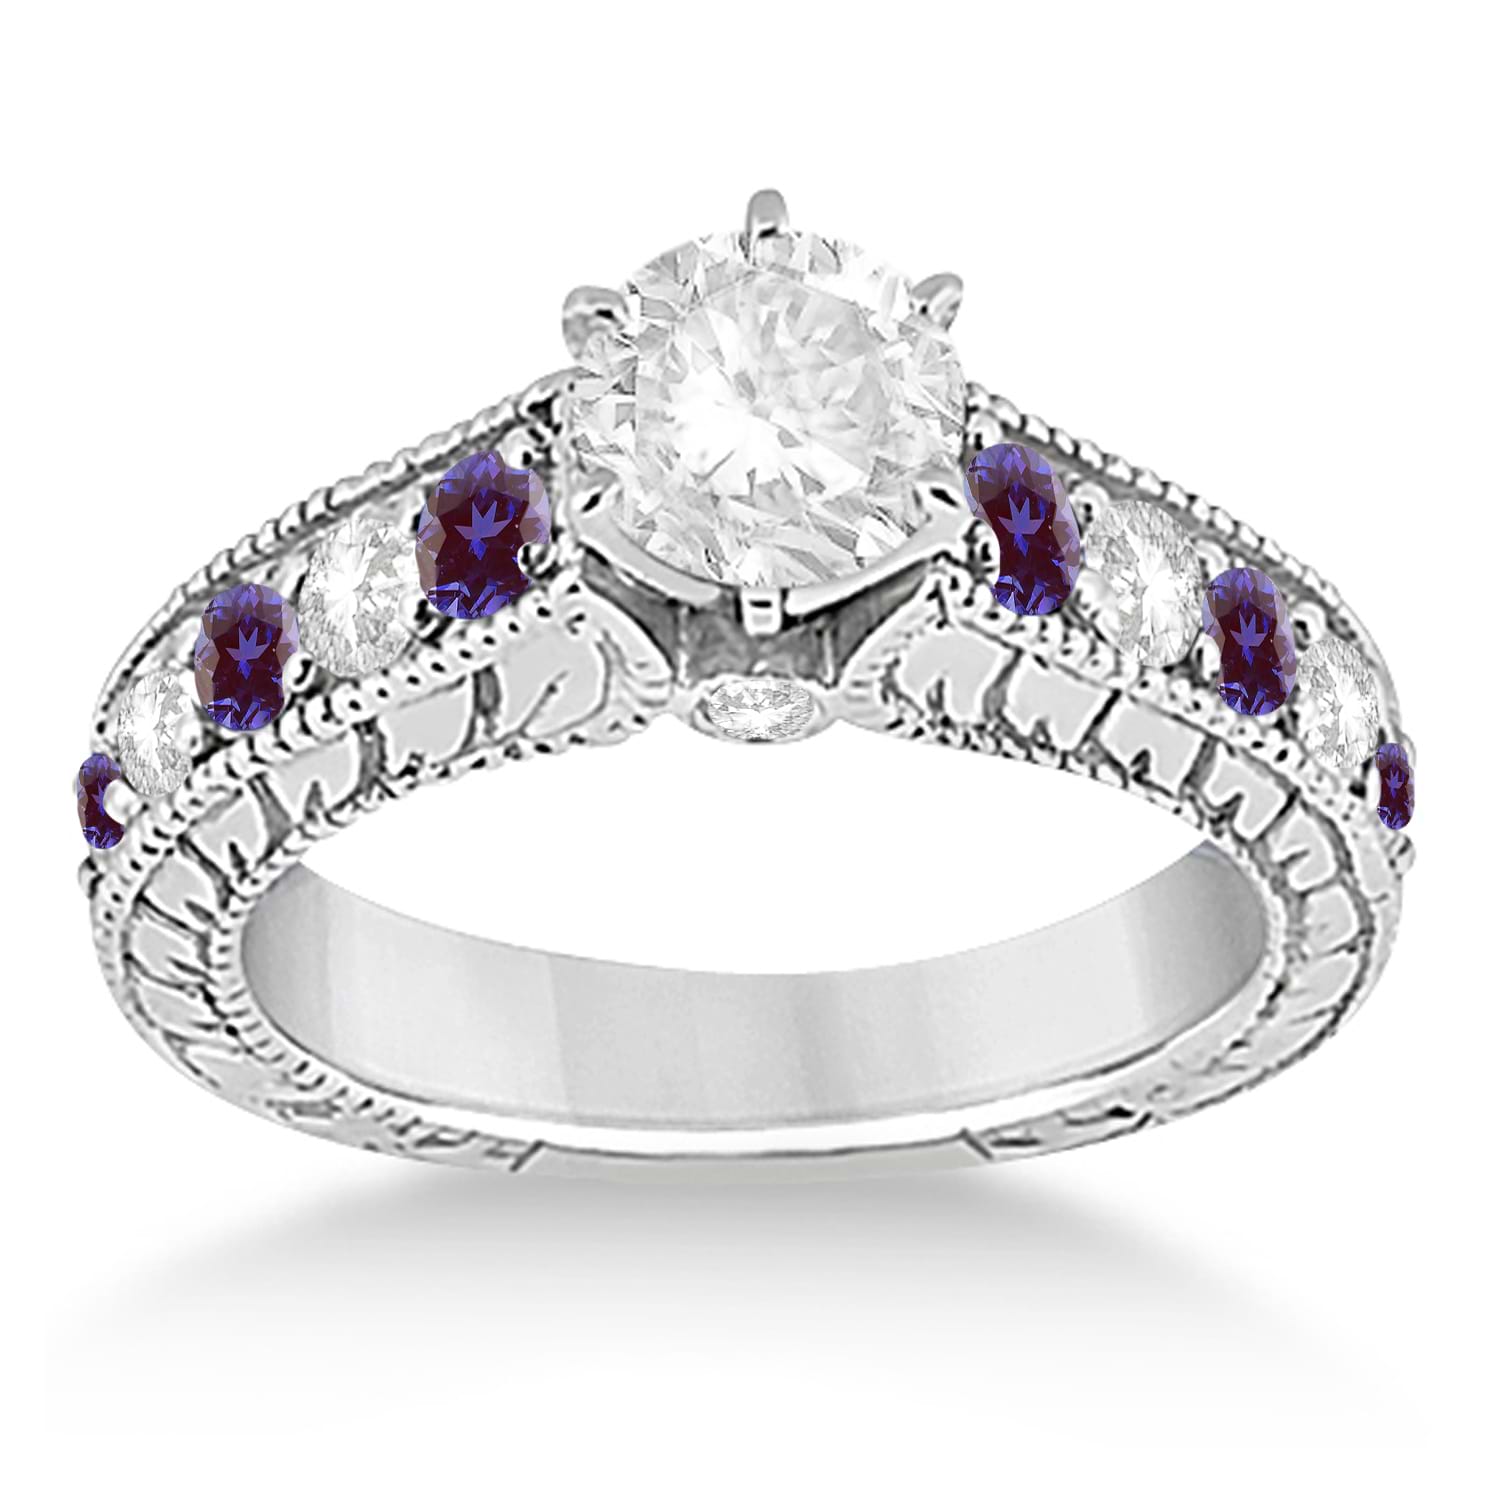 Vintage Diamond and Lab Alexandrite Engagement Ring 18k White Gold (1.41ct)